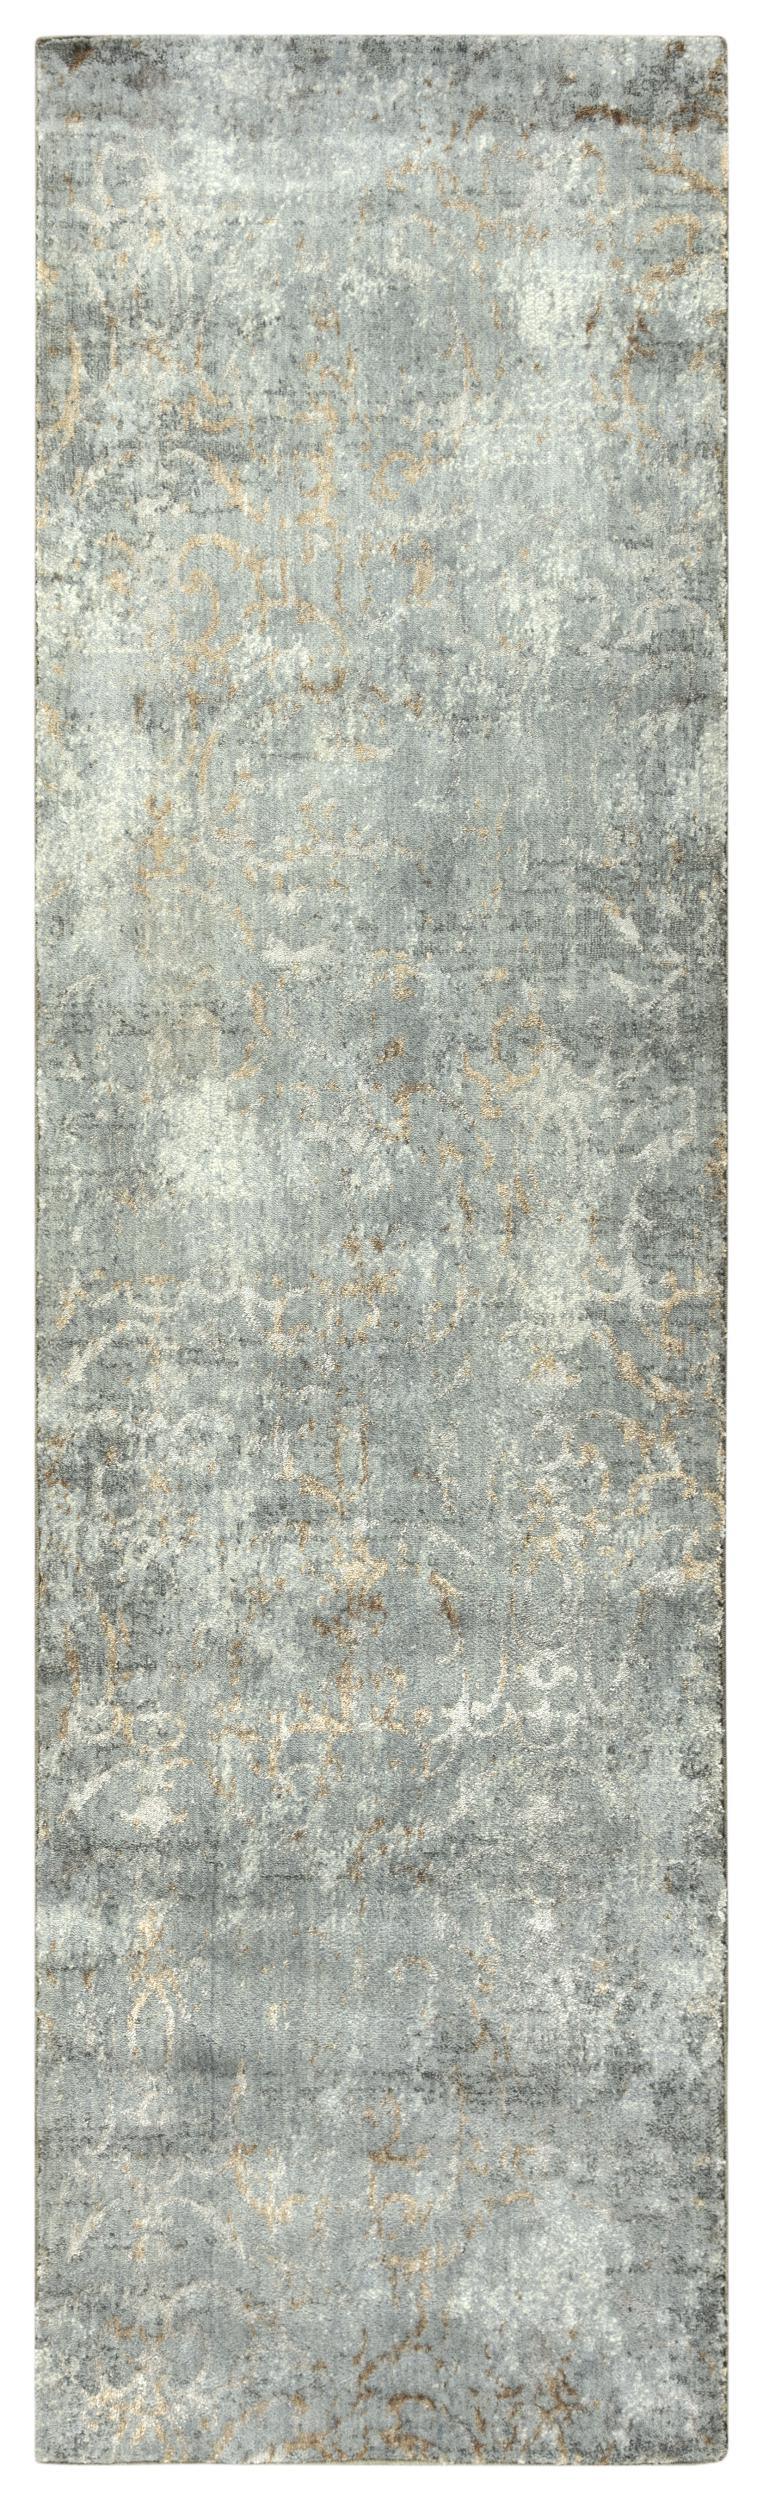 Brem Scroll Gray Large Area Rugs For Living Room Area Rugs LOOMLAN By LOOMLAN